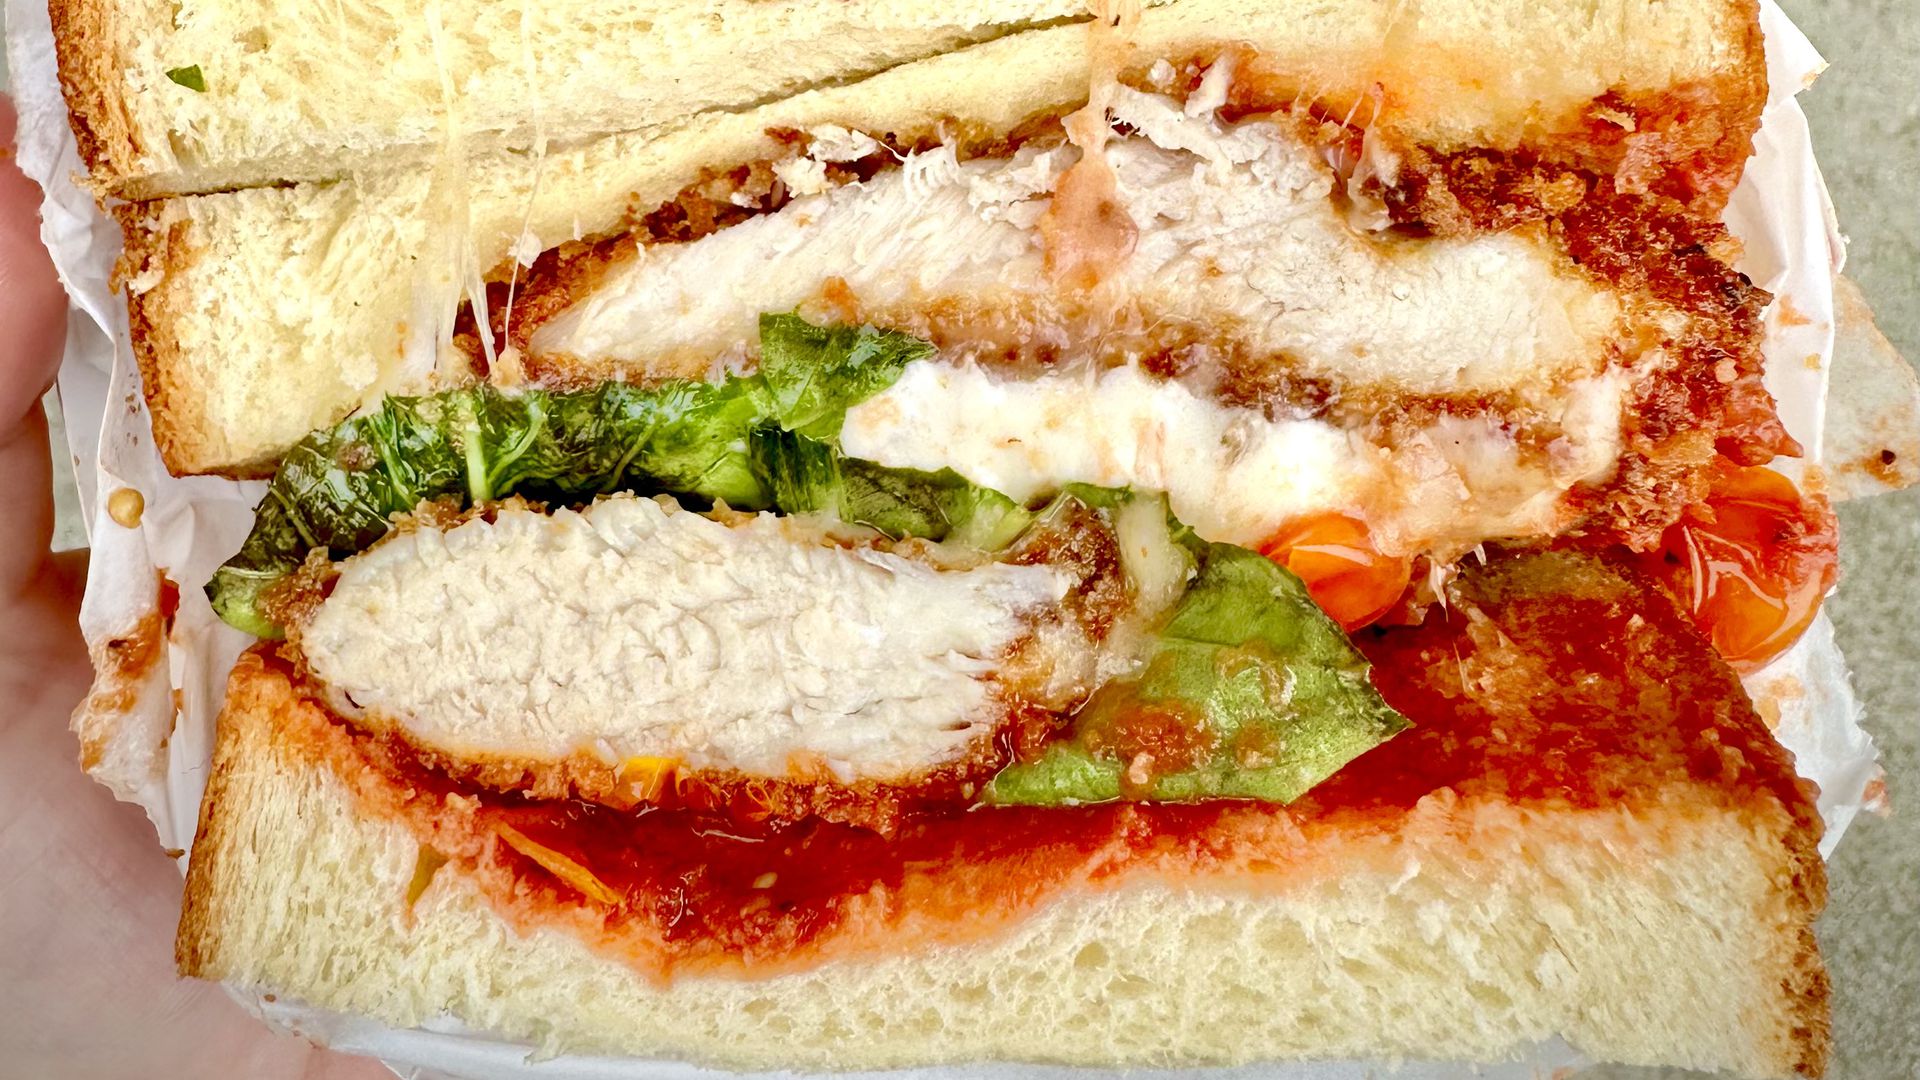 crunchy, saucy, smackin’ chicken parm sandwiches are fried to order at this new pop-up